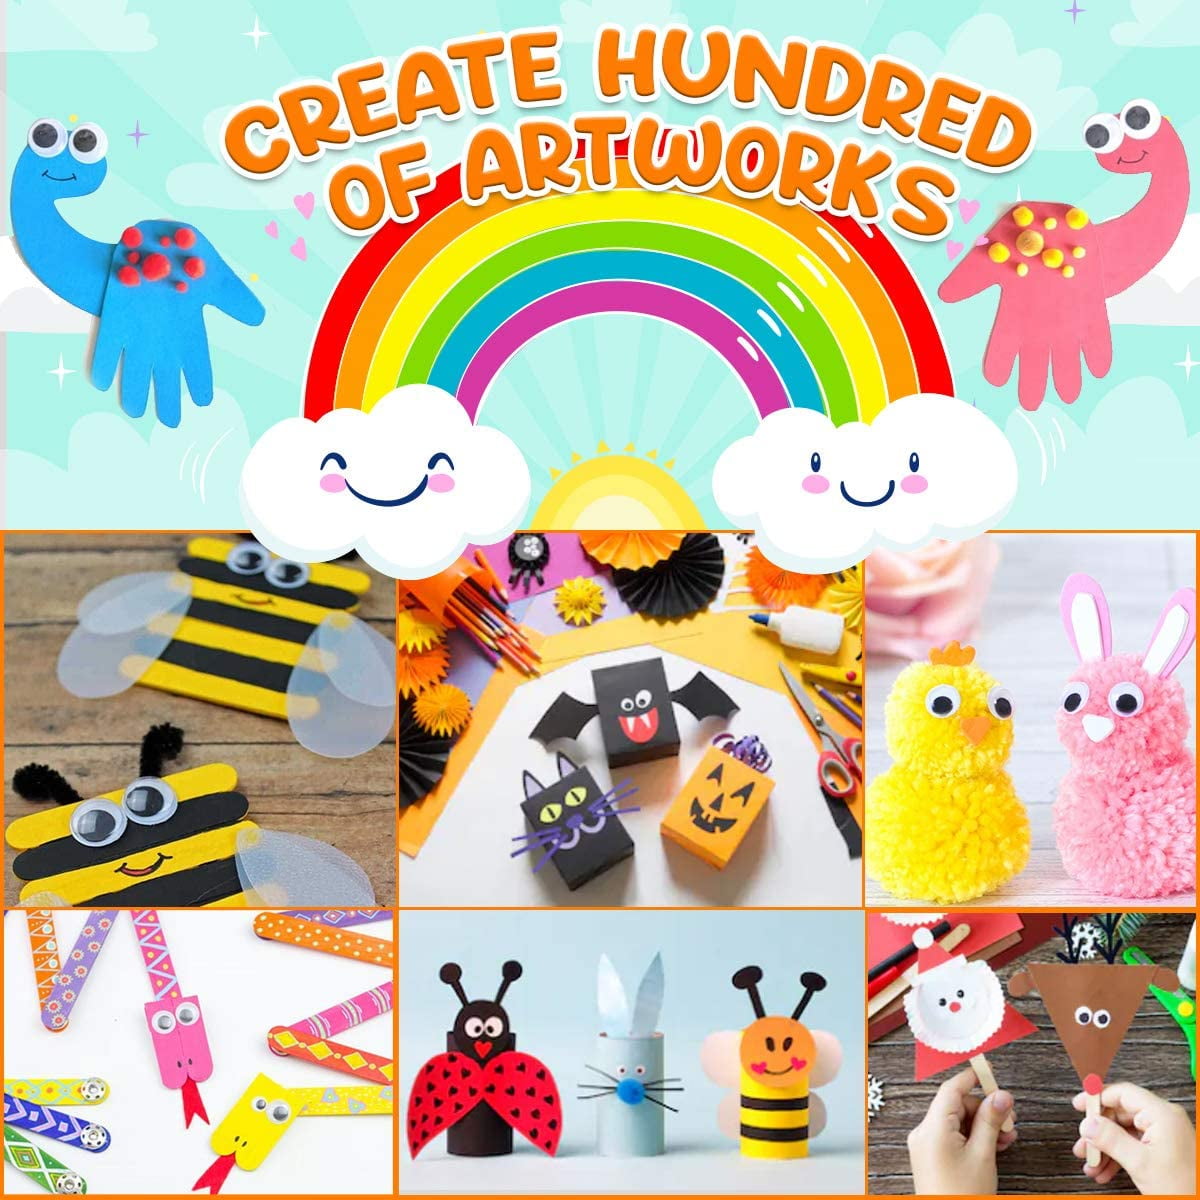 DIY Art Craft Toys Arts Crafts Supplies for Kids Assorted Craft Art Supply  Kit for Toddlers